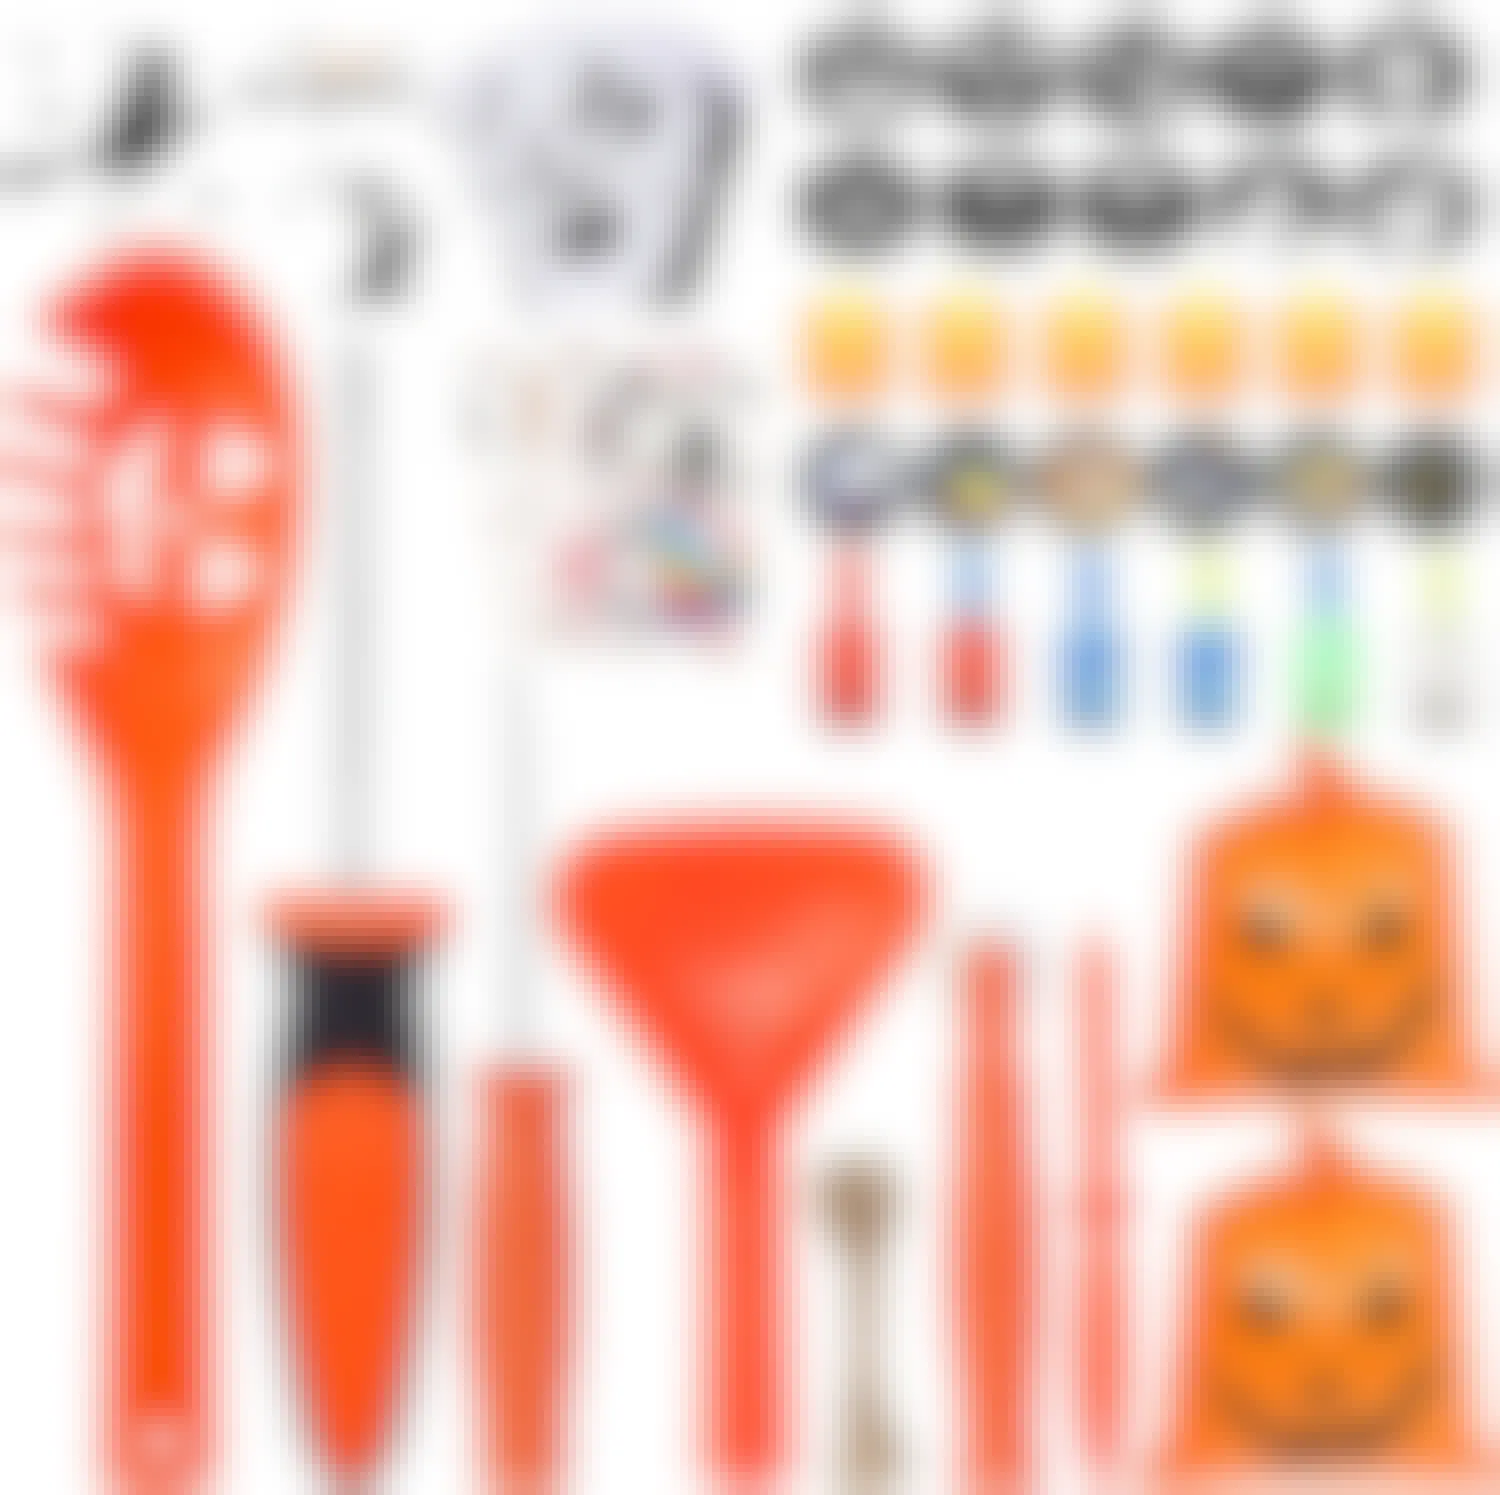 best pumpkin carving kit - An AOSTAR All in One Pumpkin Carving Kit on a white background.